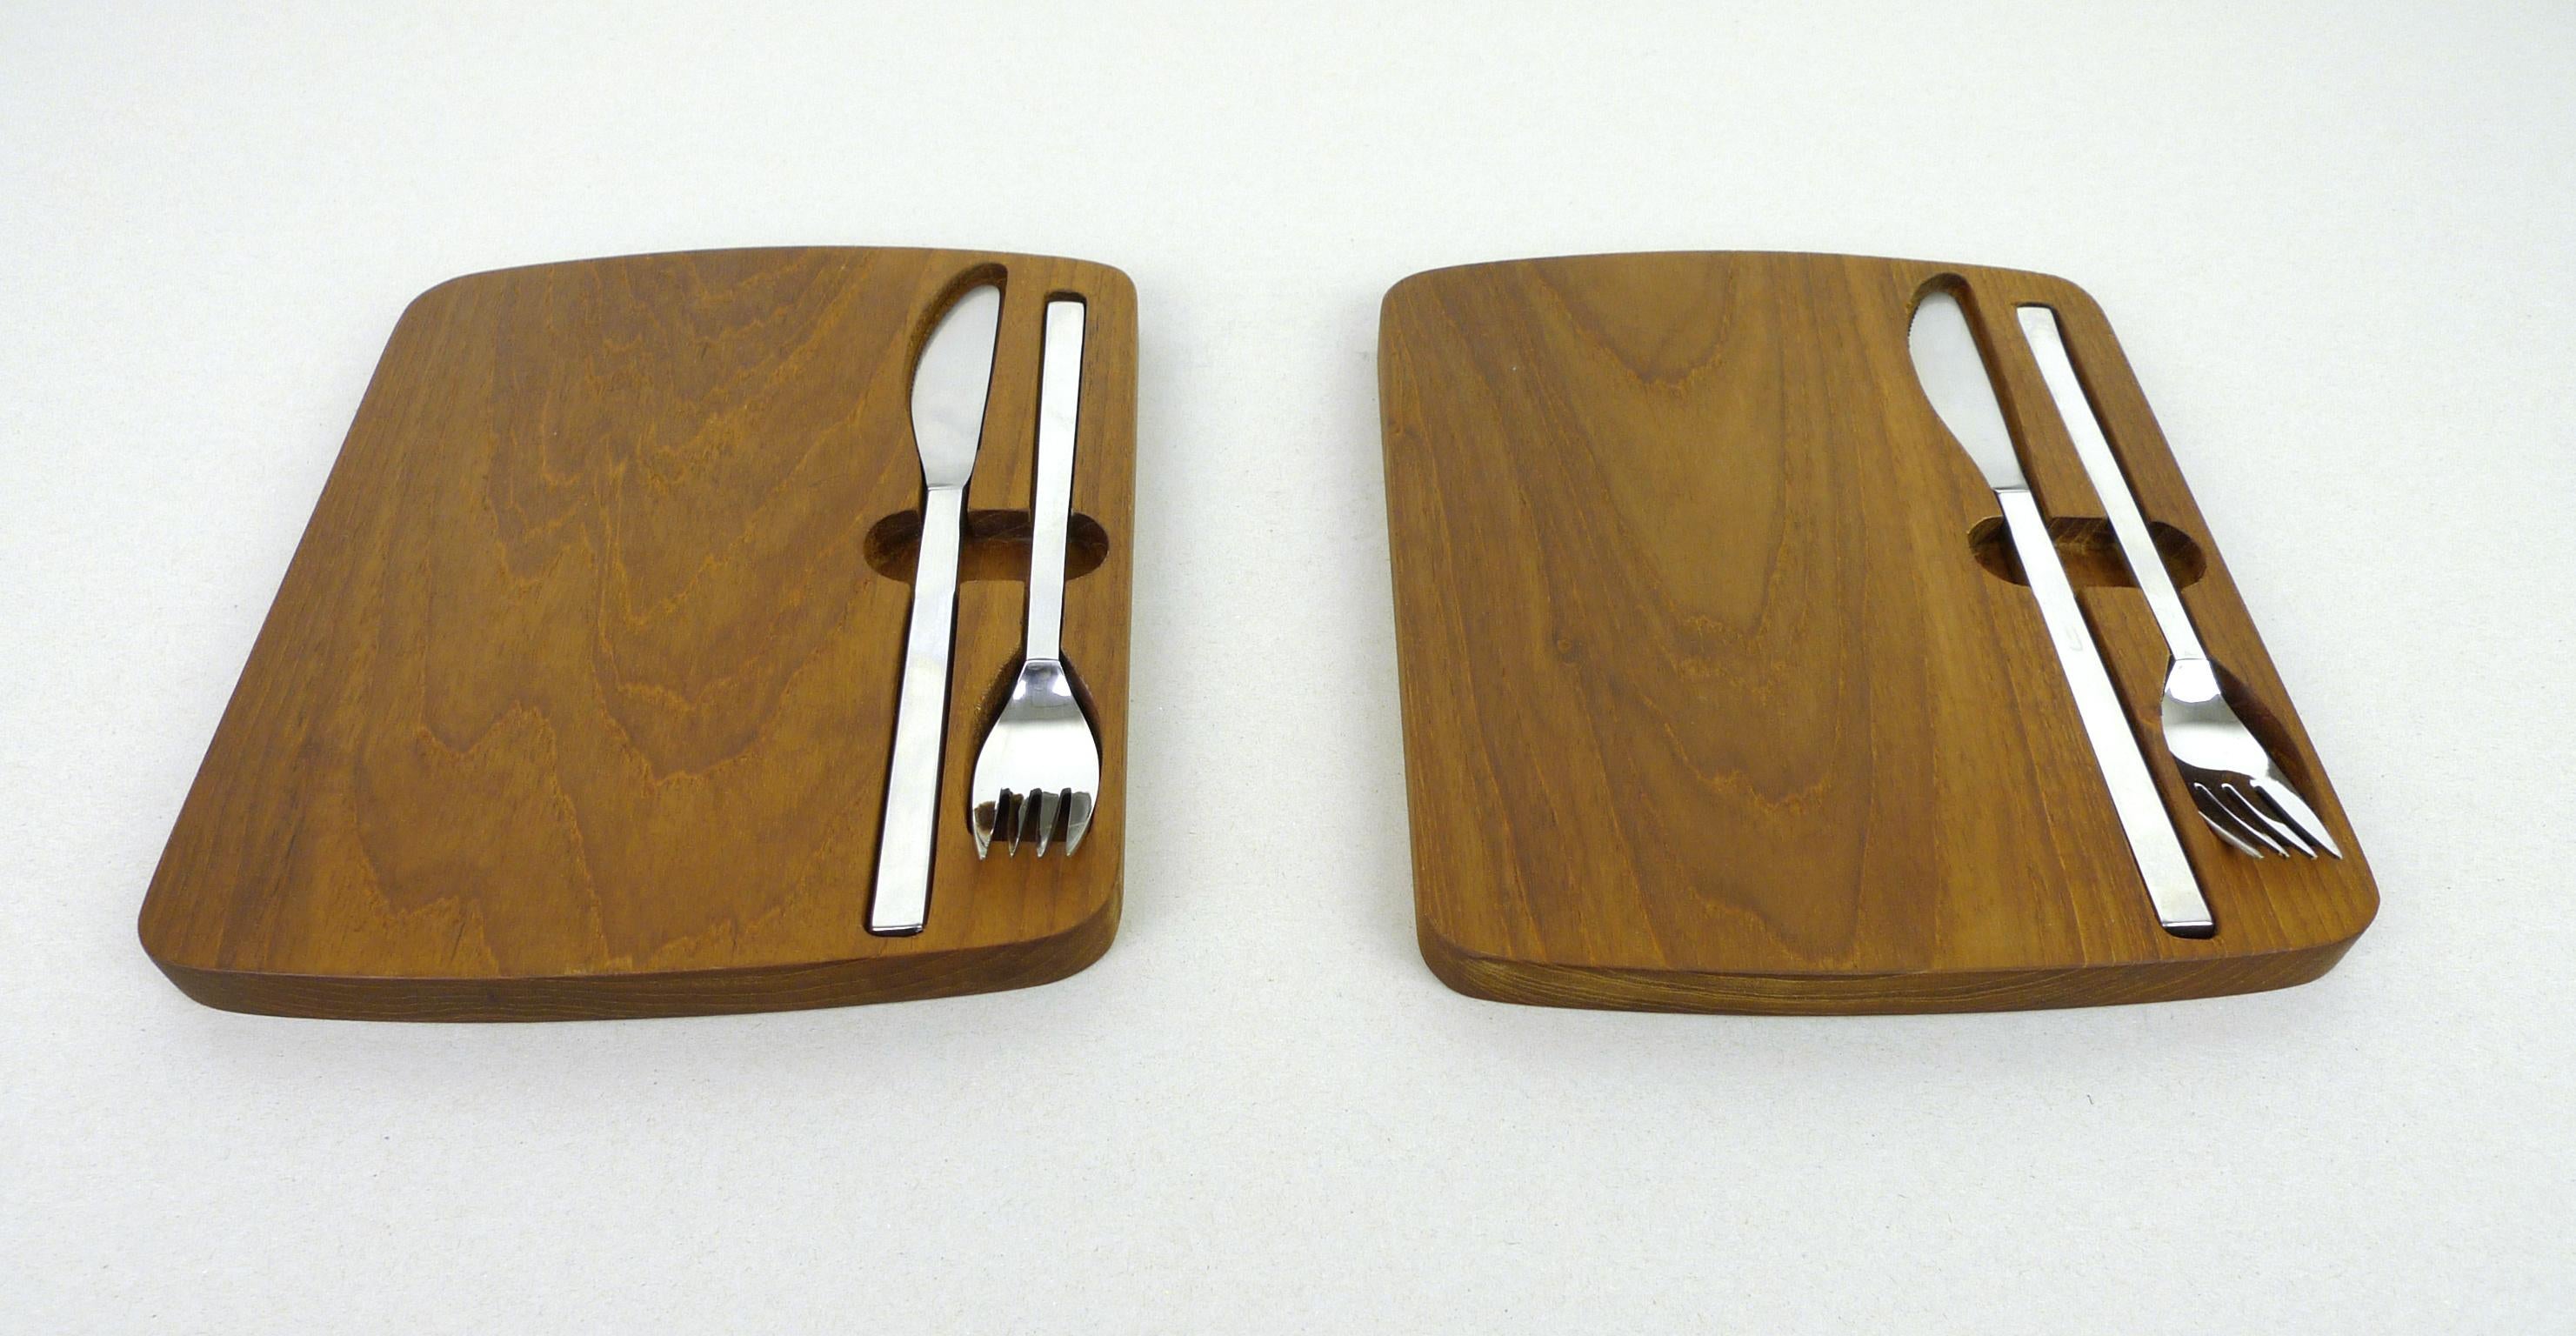 This set of two snack boards made of solid teak wood with inset metal cutlery was made in the 1960s by Bremer Silberwarenfabrik AG. The set is in very good condition.